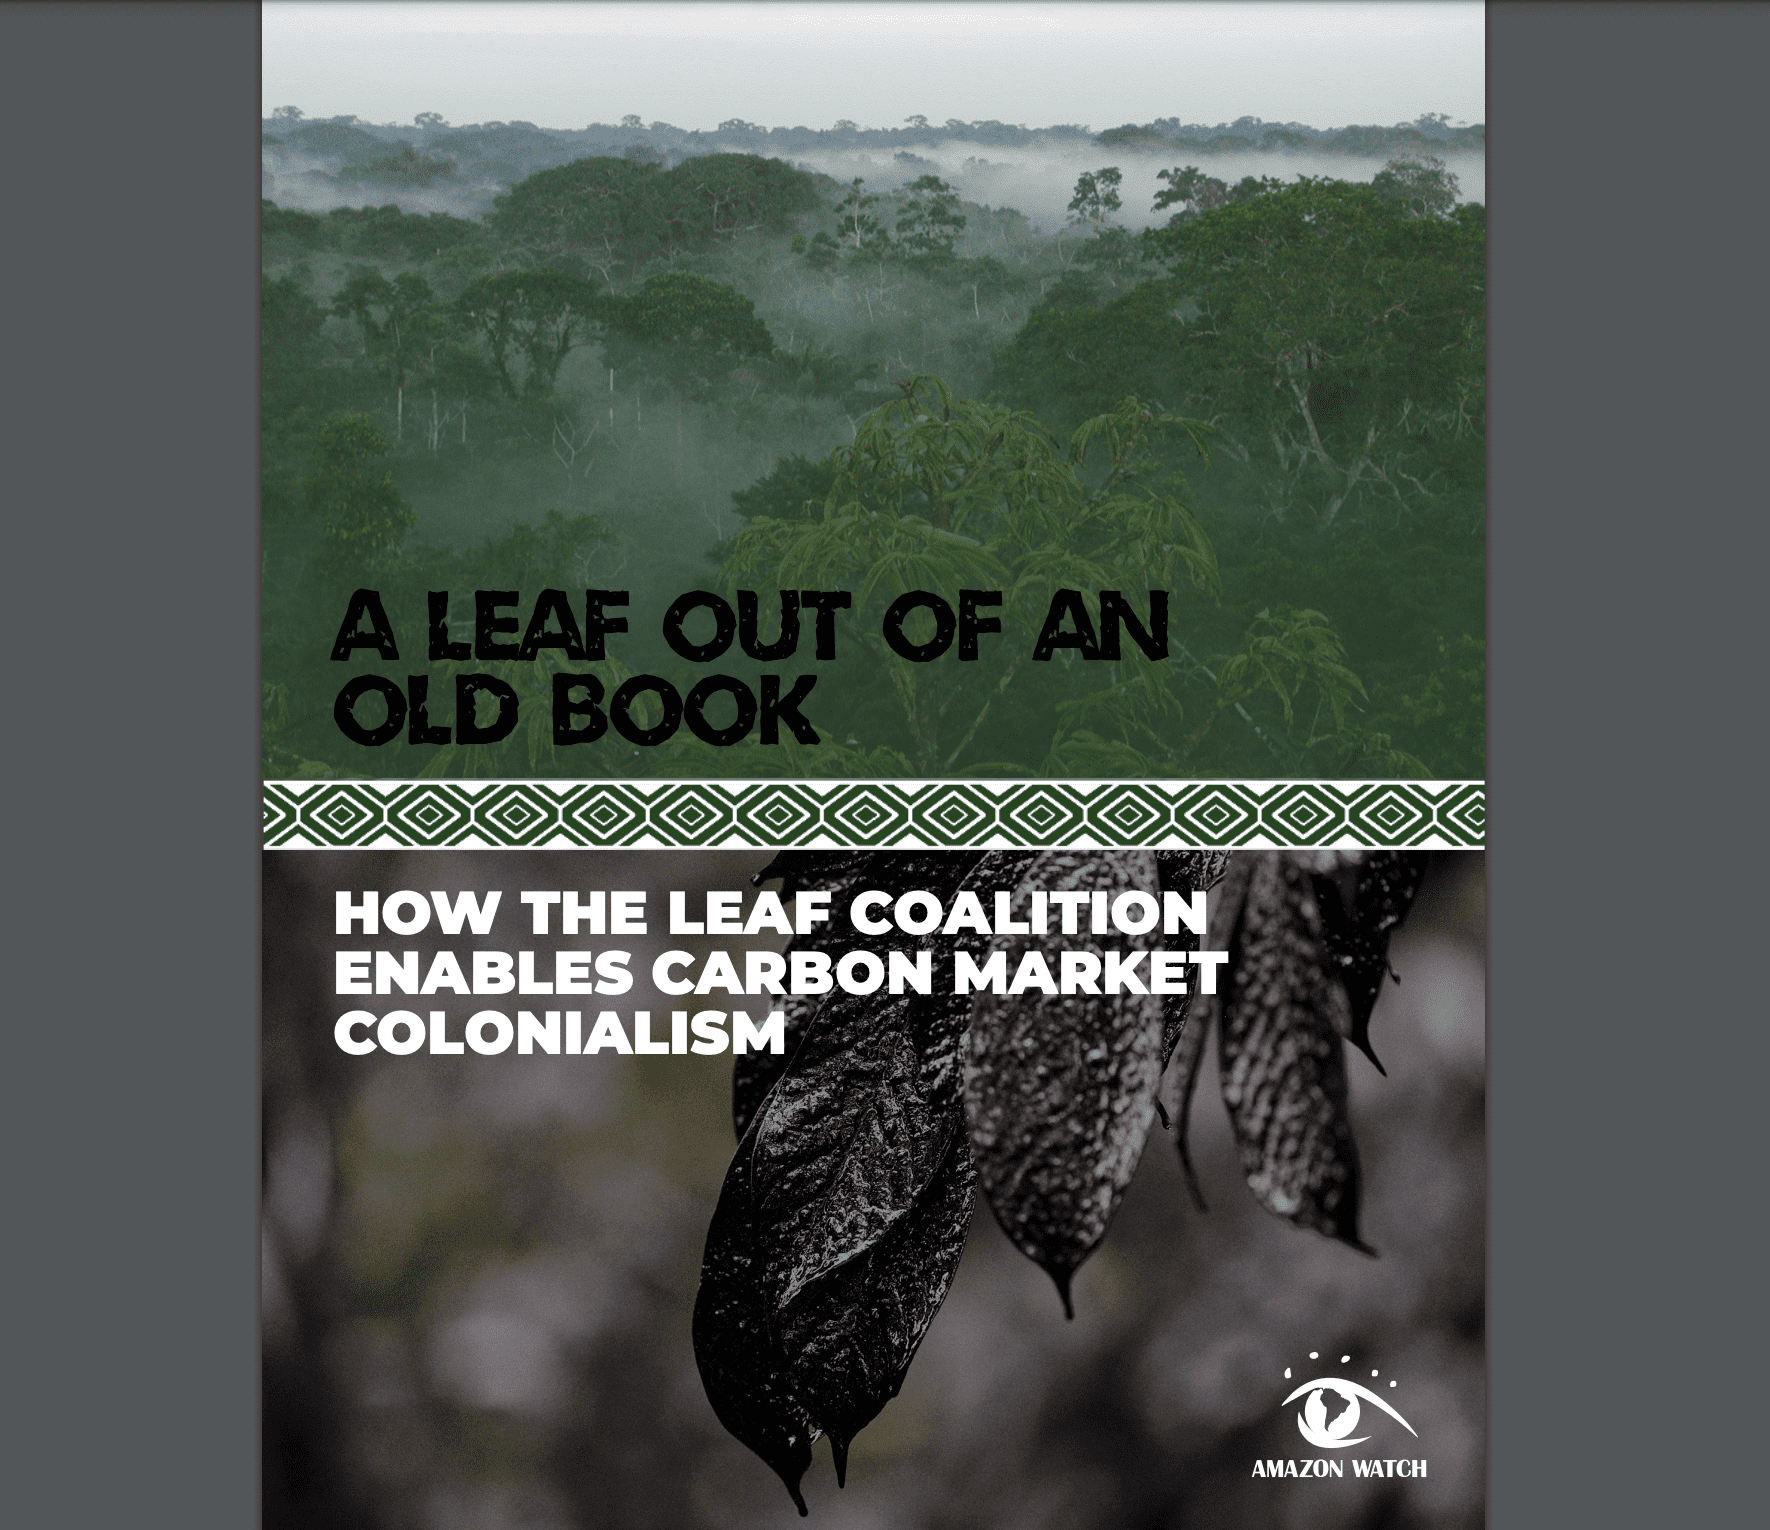 Two images separated by a green-patterned border. The top image is of the verdant treetops of a forest, the second is a close-up photo of oil-dipped leaves. The text reads A leaf out of an old book, how the LEAF coalition enables carbon market colonialism.